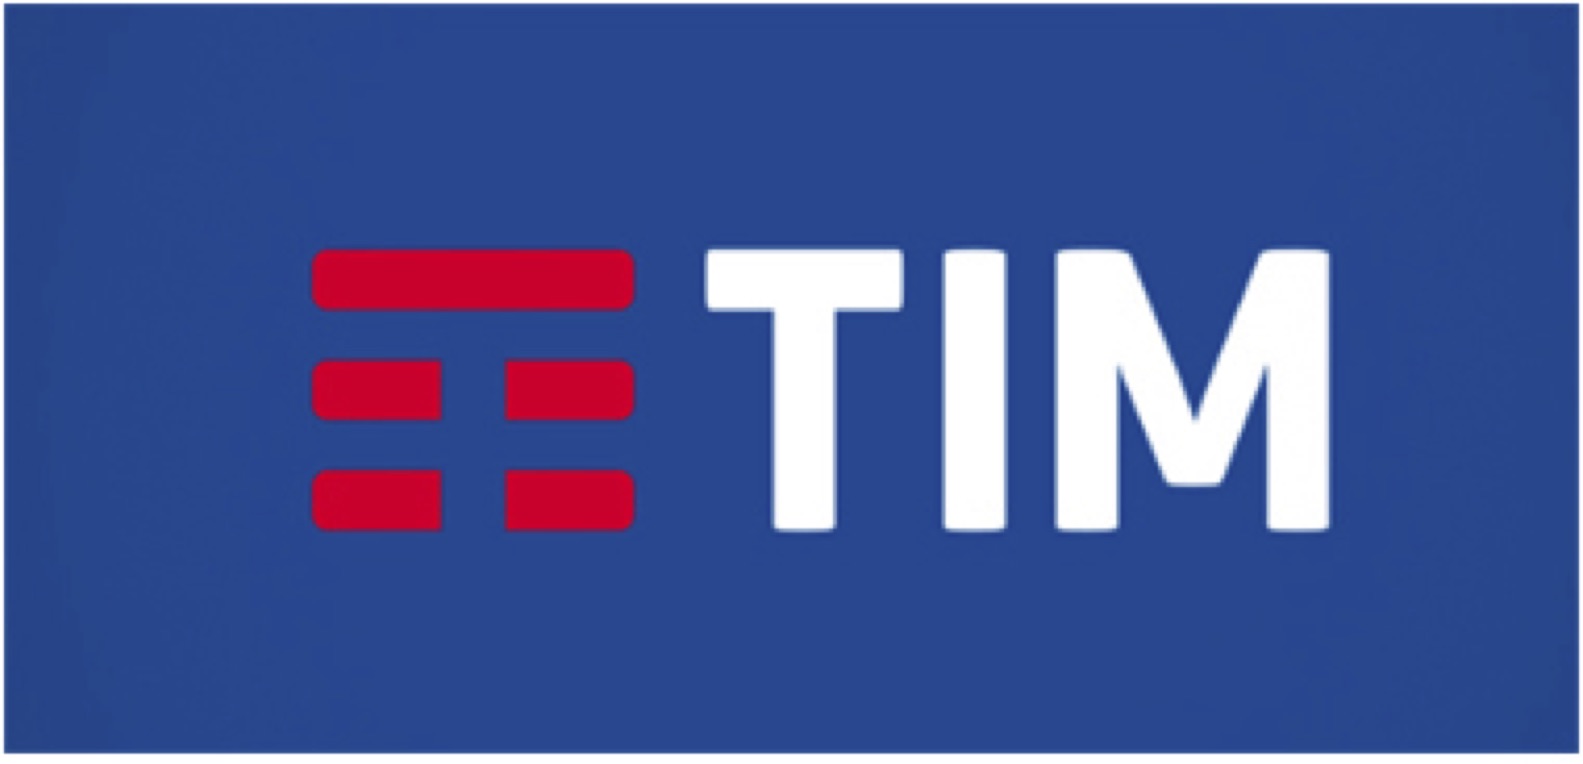 THE NEW LOGO OF TELECOM ITALIA HAS BEEN SELECTED WITH SUPPORT FROM ...